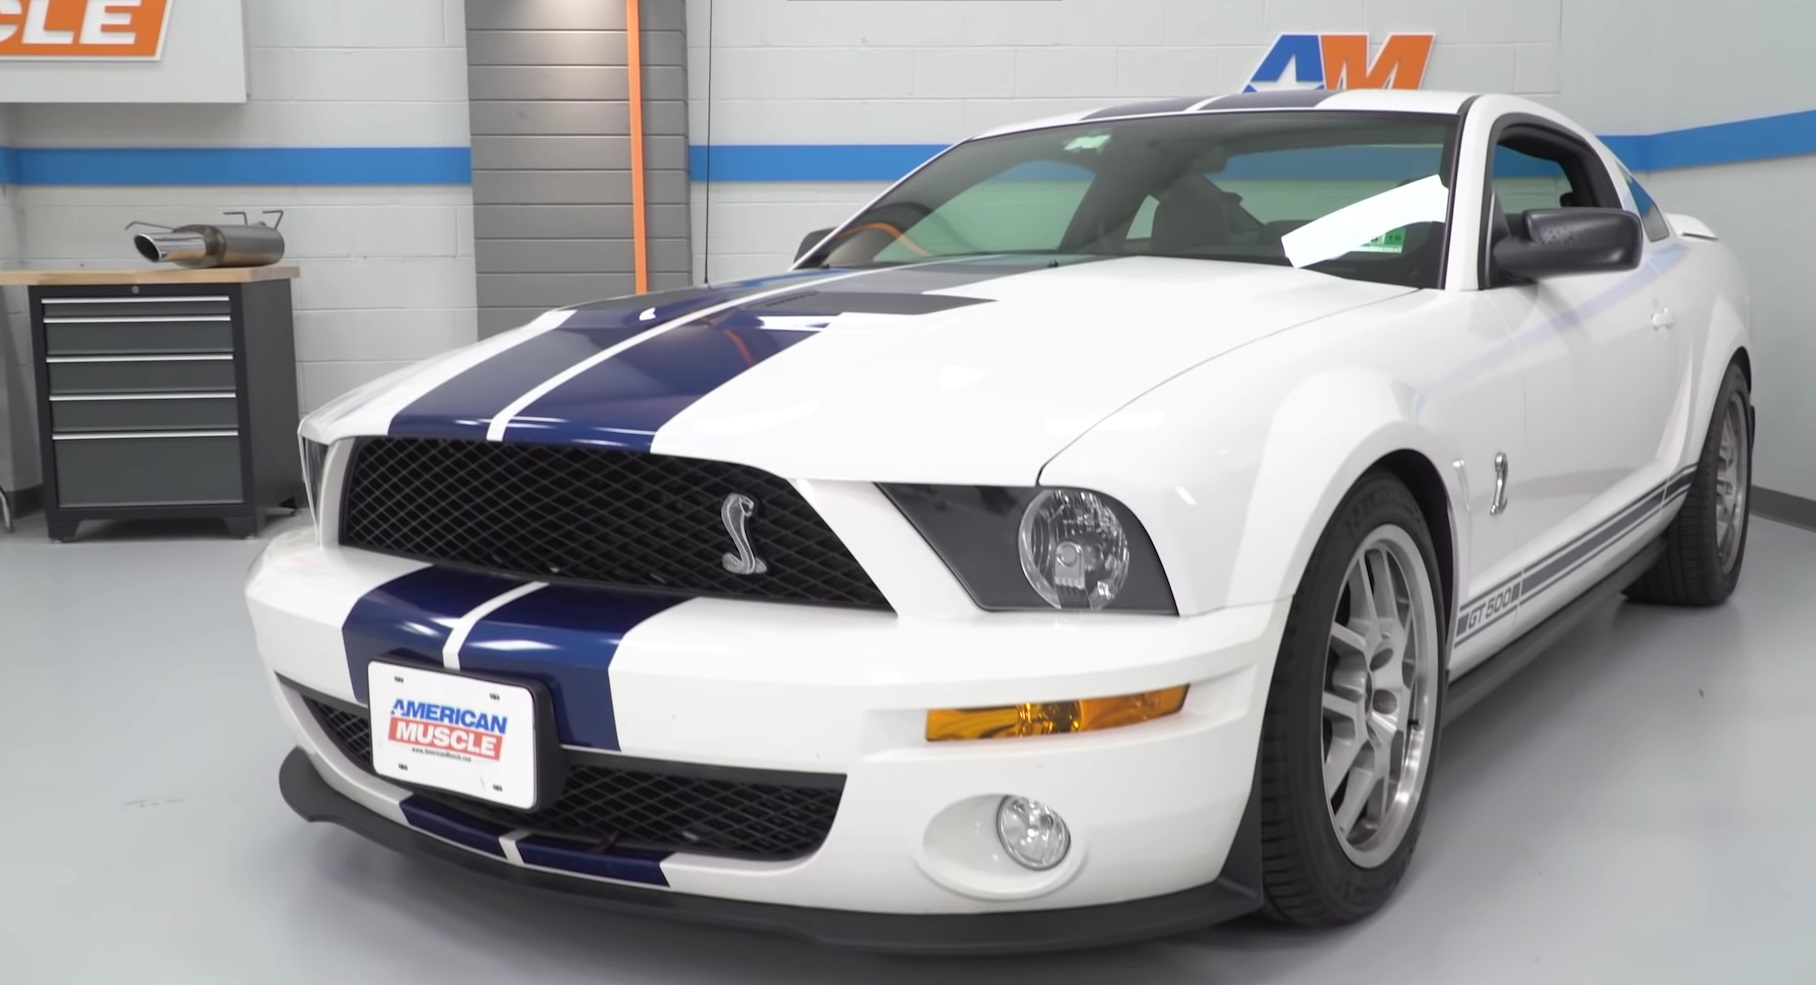 Video: 660 Horsepower 2008 Ford Mustang Shelby GT500 Whipple Supercharger Build